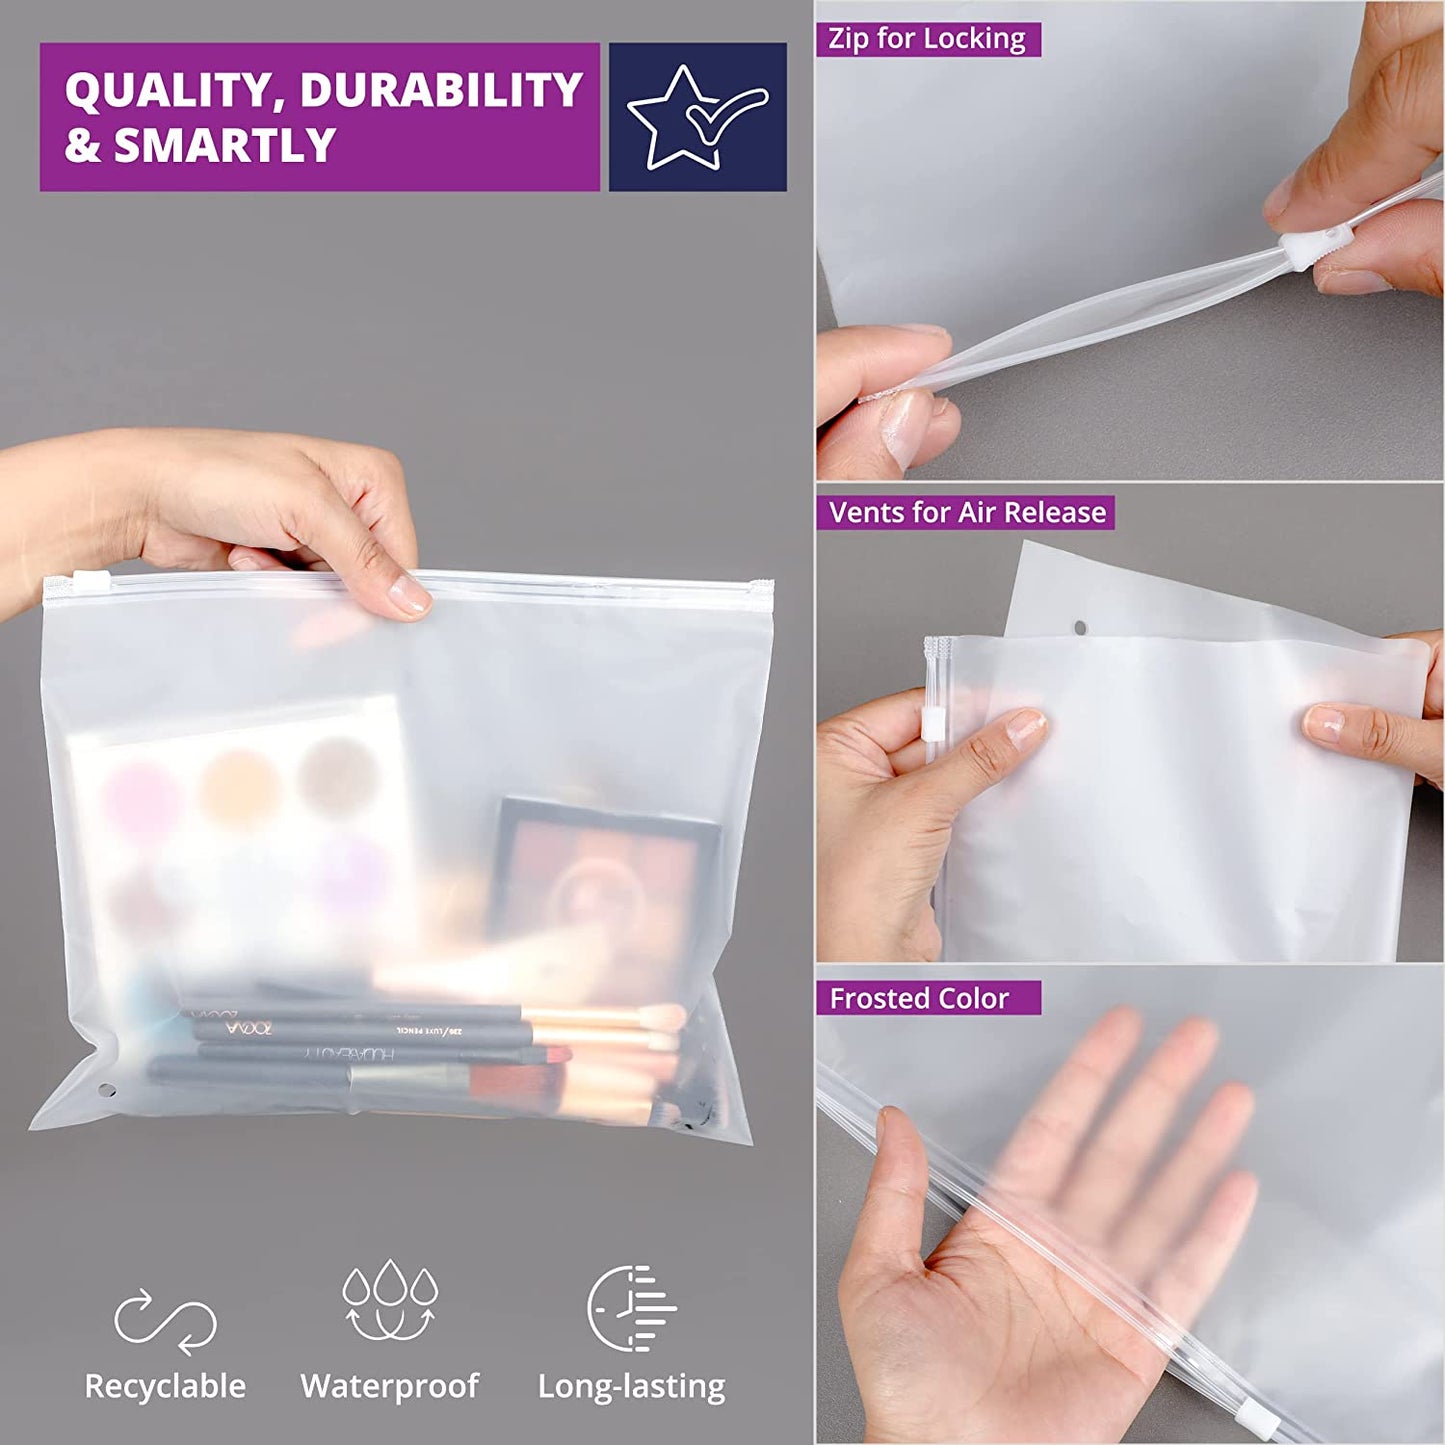 Ziplock Bags –16 PCS Frosted Hospital Bag Maternity Essentials with Vents in 4 Multiple Sizes -Resalable Storage Bags for Clothes, Travel Essentials, Toiletries, Crafts Supplies